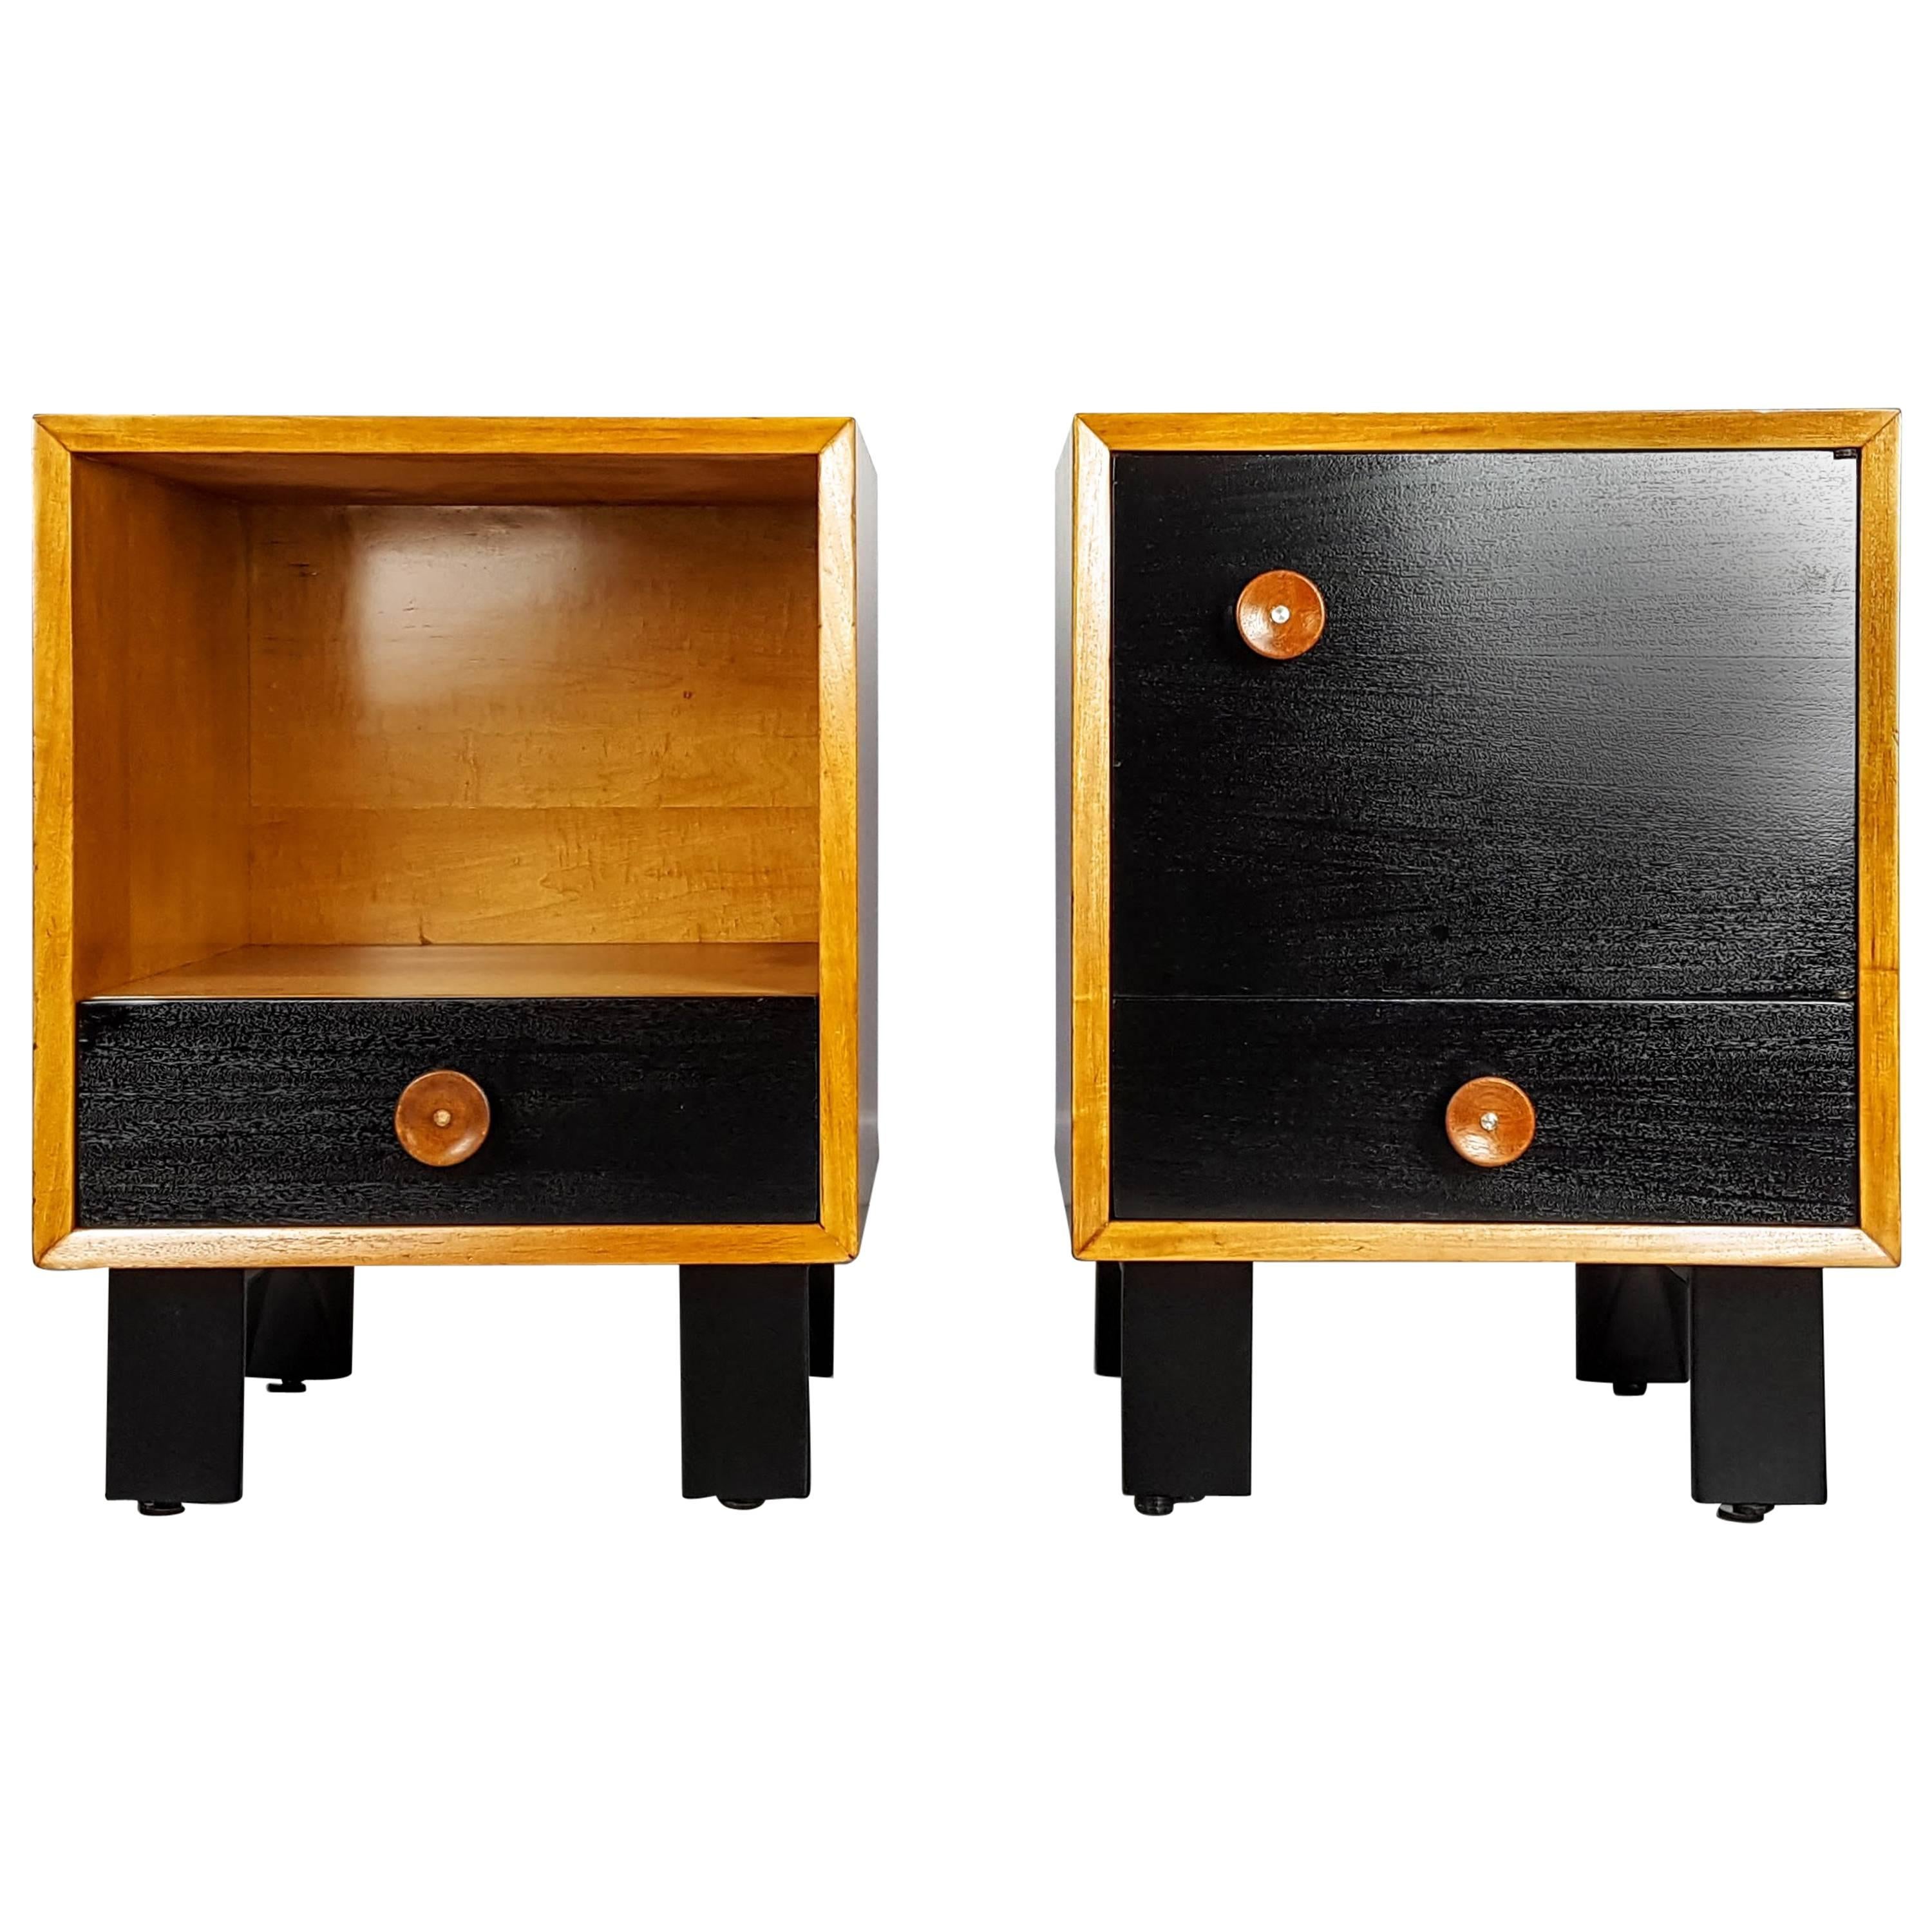 Classic Midcentury Nightstands with Cupcake Pulls by George Nelson, 1950s